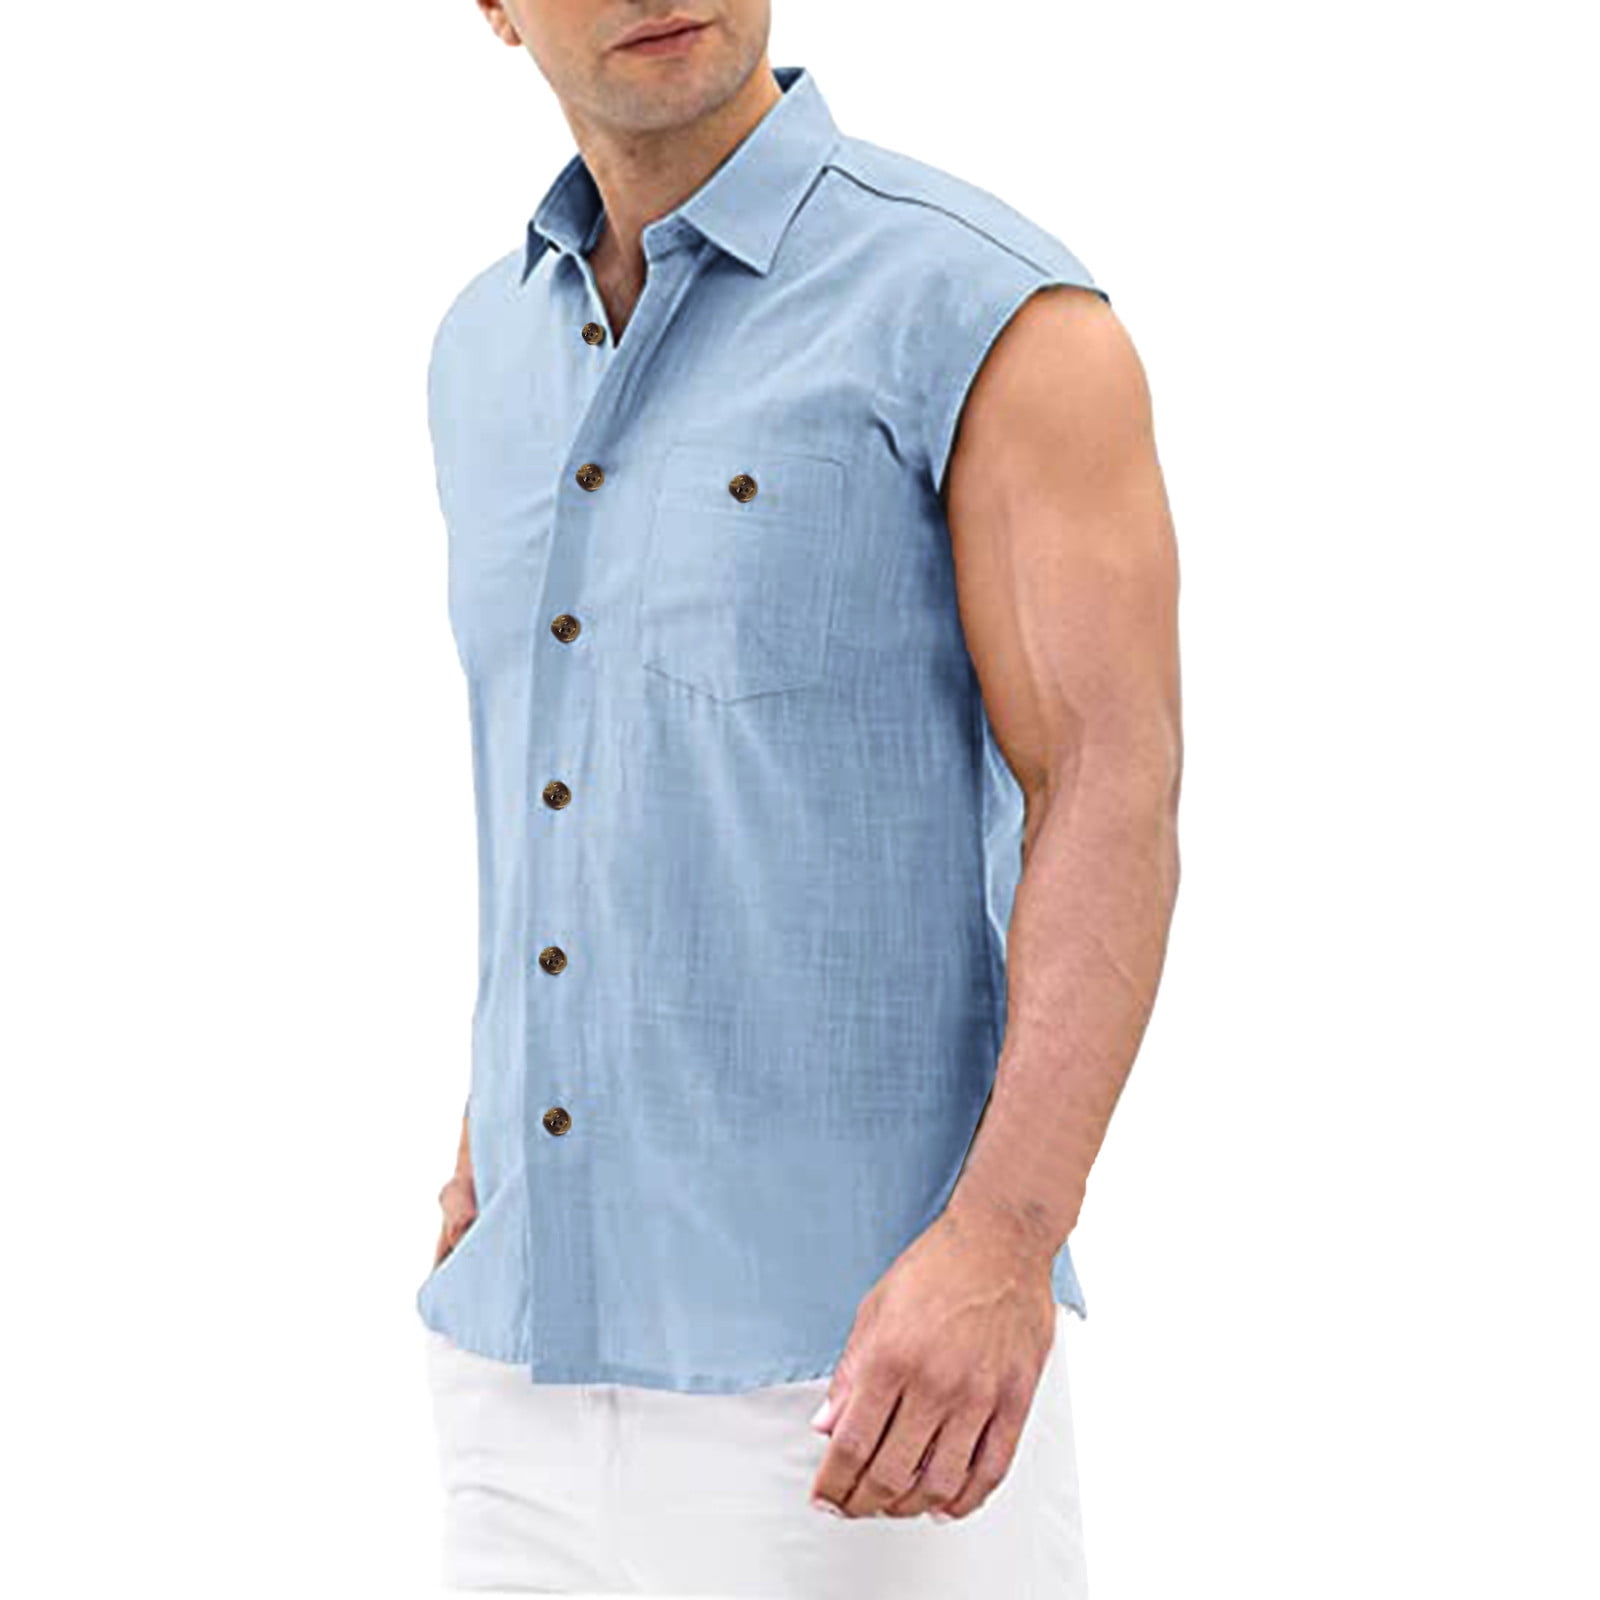 Men's spring summer outfit with light blue plain shirt, white